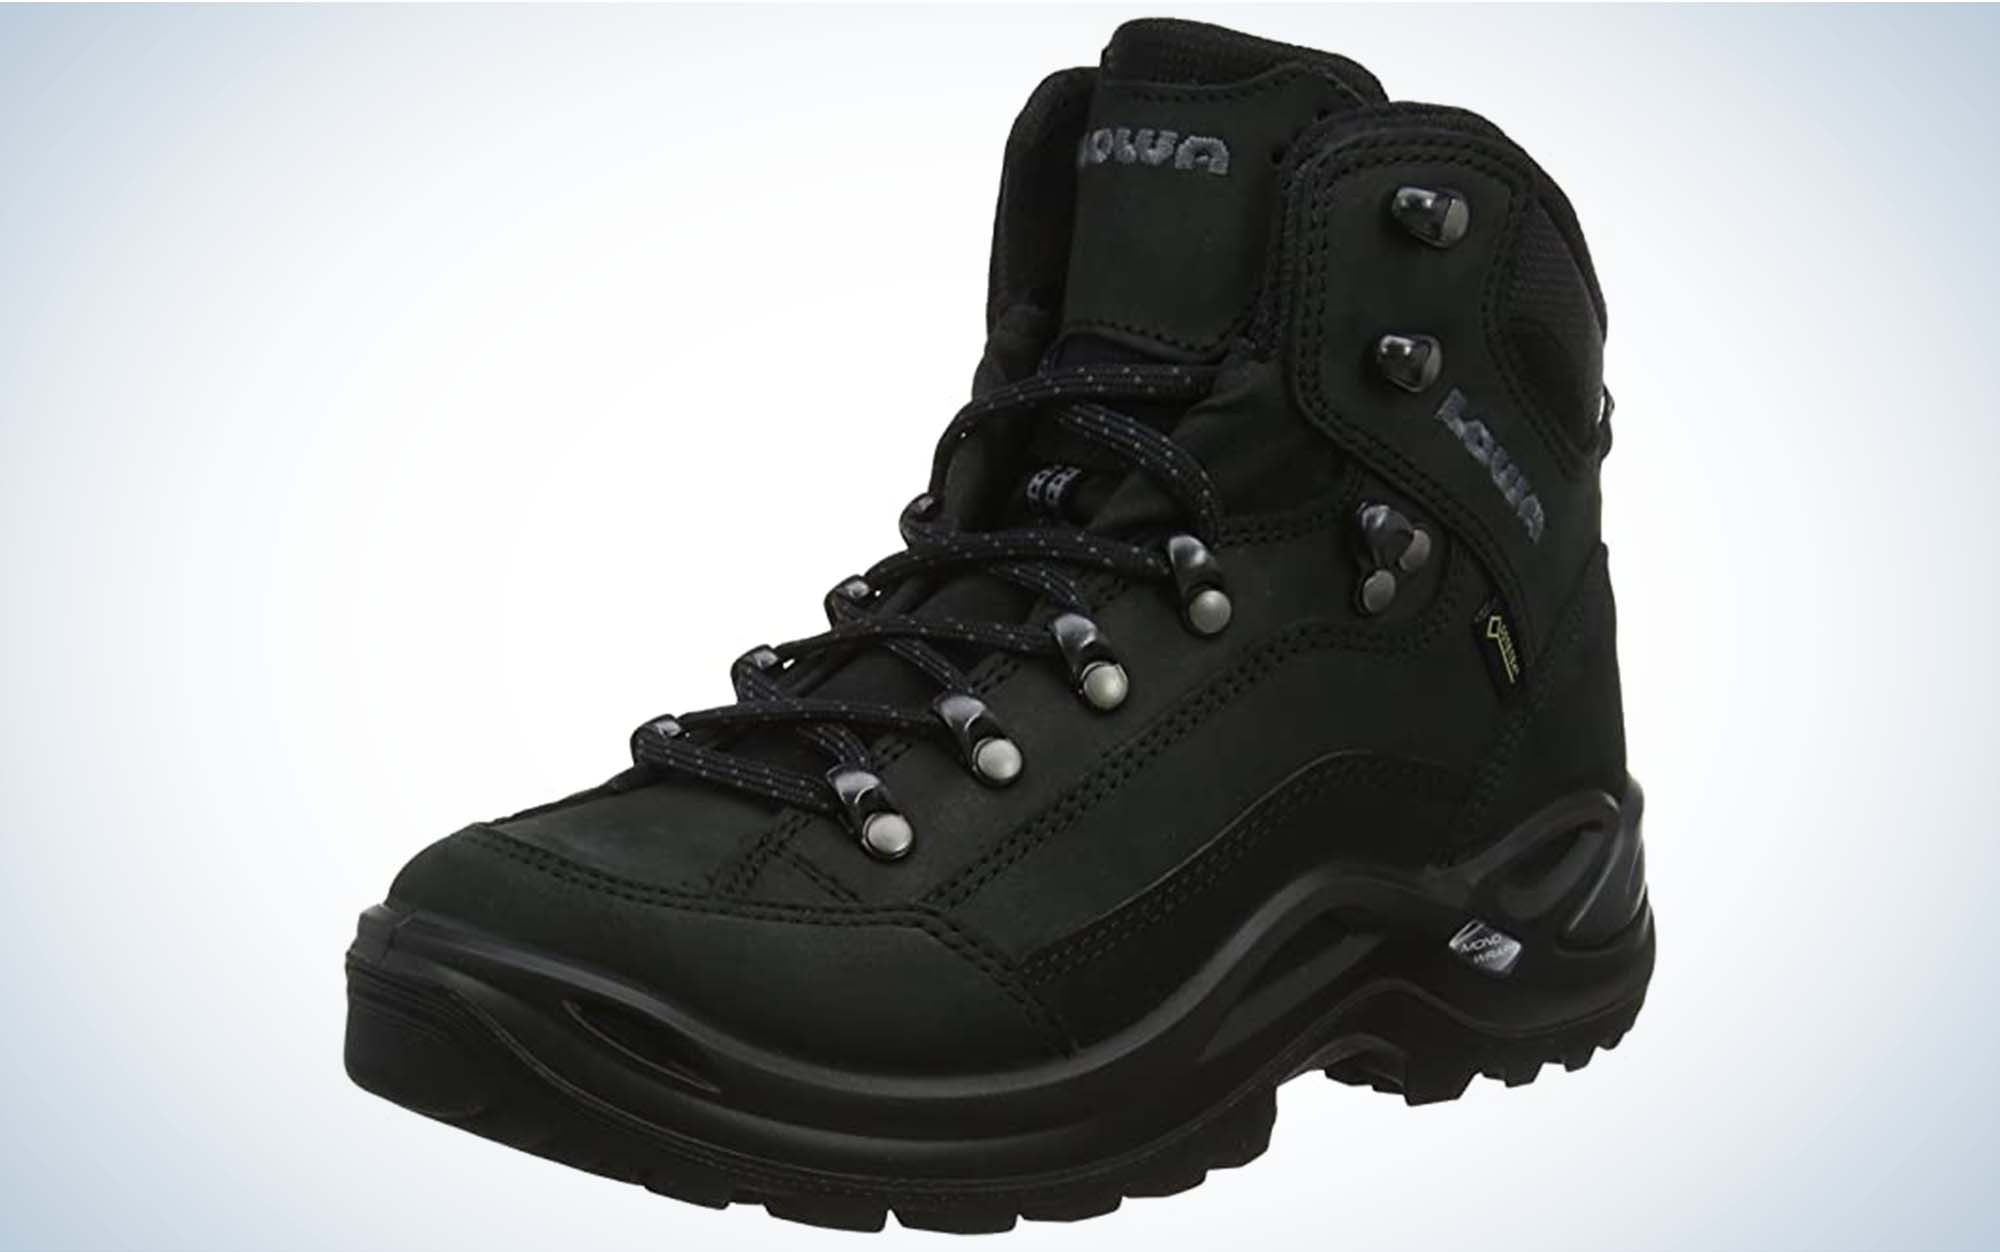 Lowa Renegade GTX Mid Hiking Boots are the best fitting hiking boots for women.